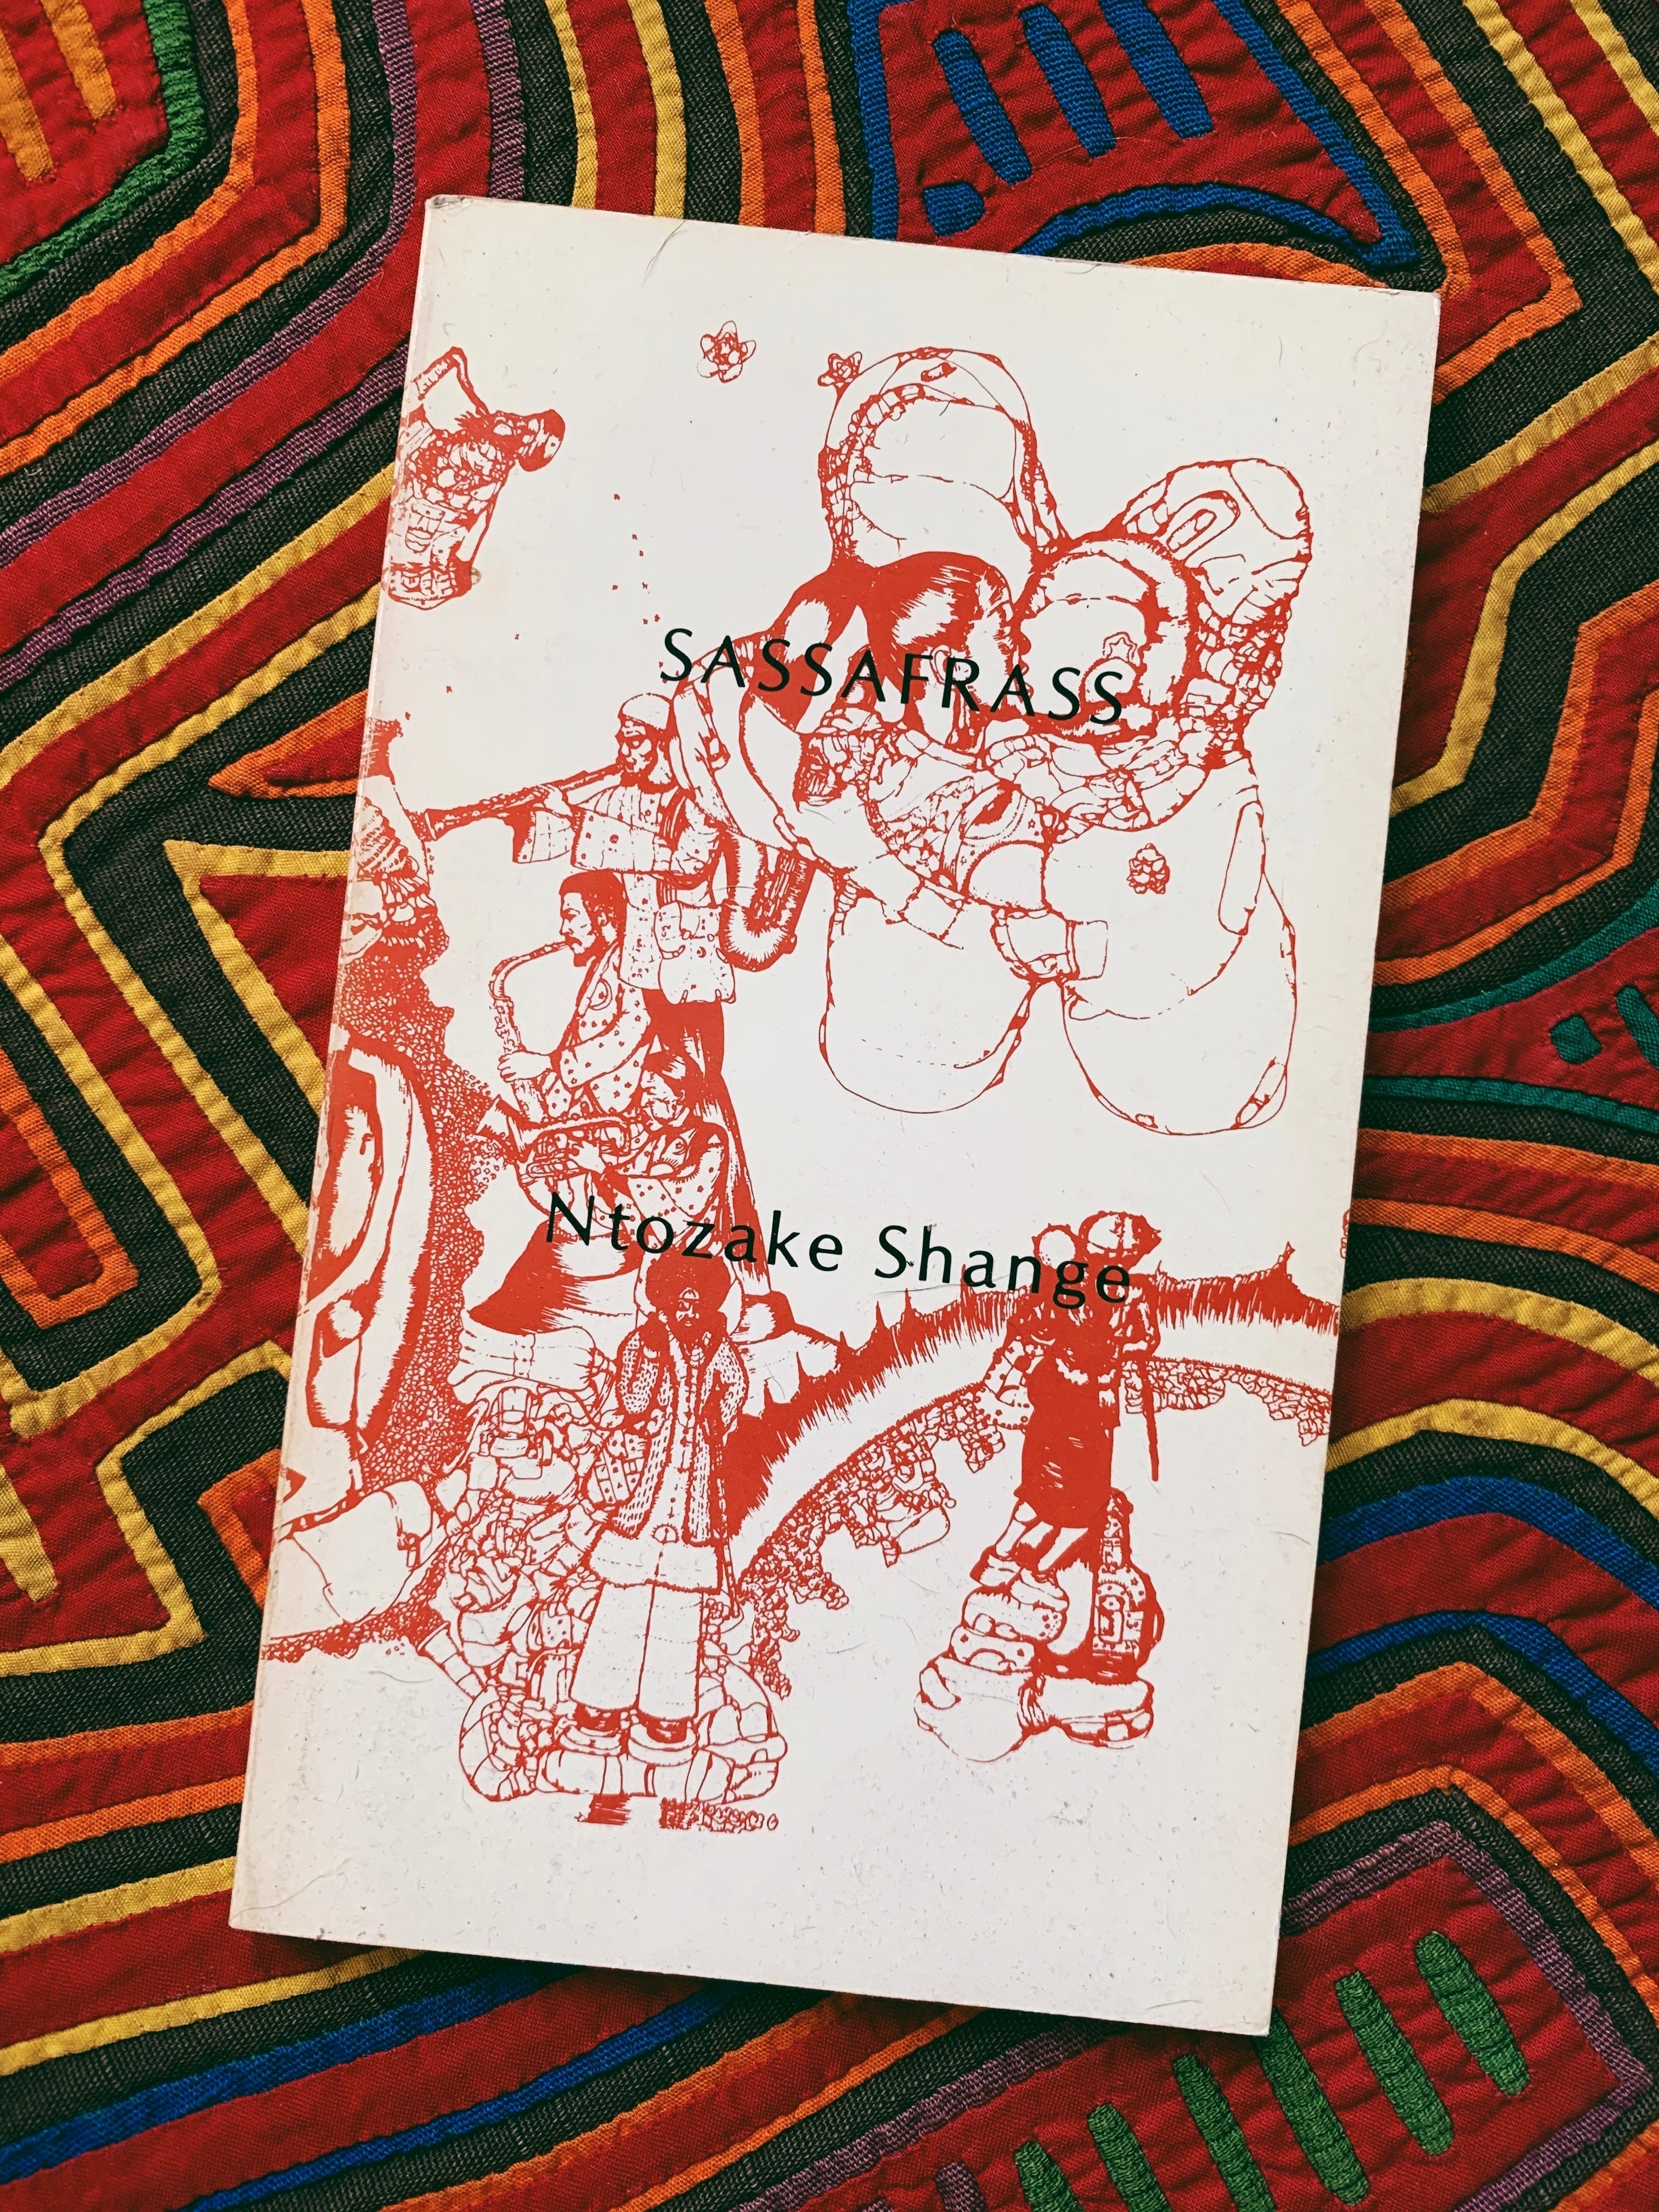 Vintage SIGNED Softcover “Sassafrass” by Ntozake Shange (First Edition, 1976)